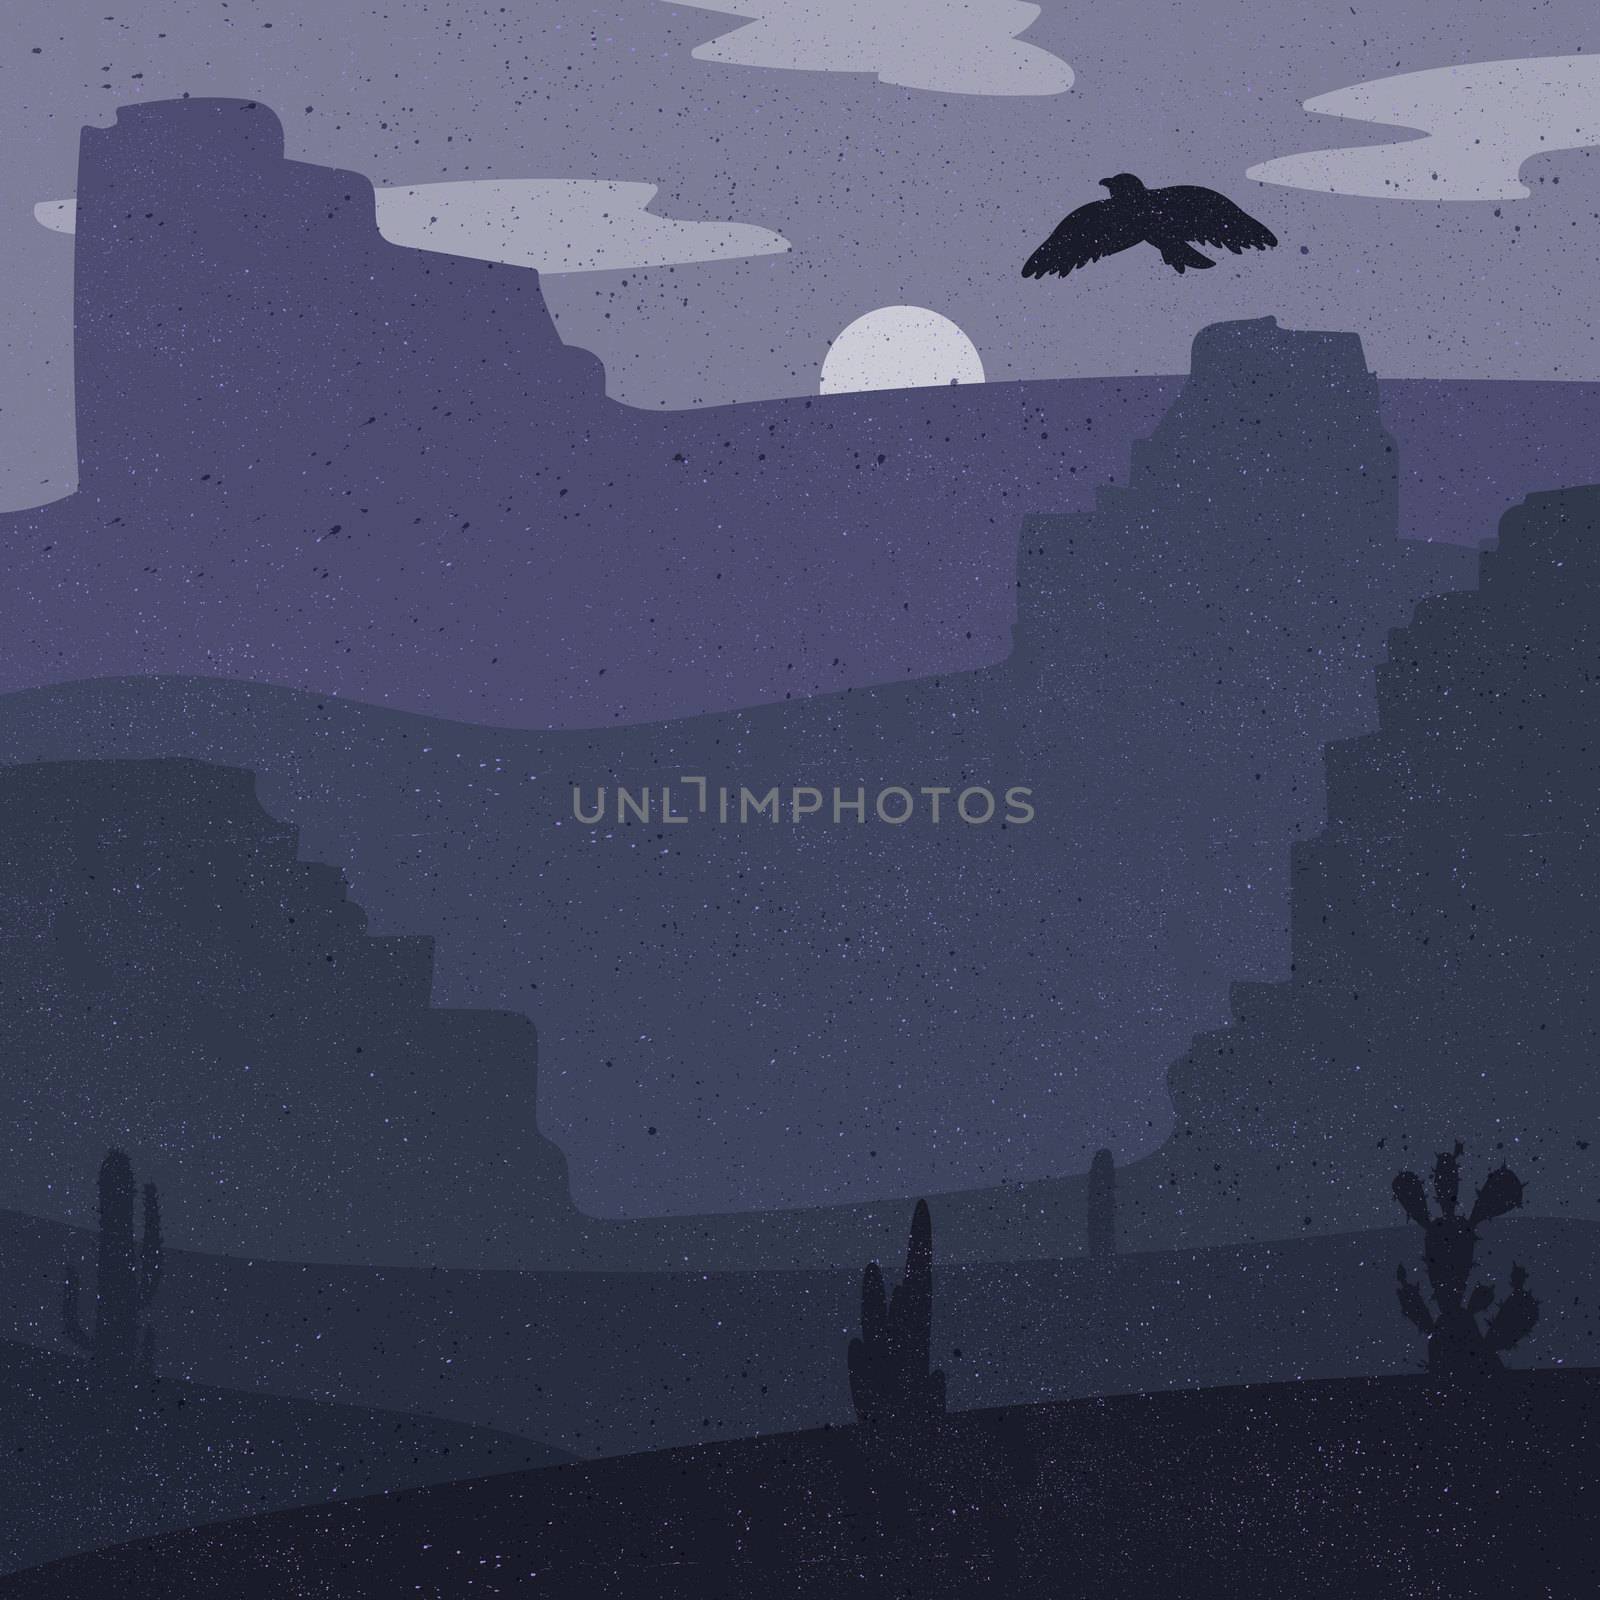 Night Retro Wild West Desert. Vintage moon in prairie with cacti and eagle in sky. Grunge old texture. Natural Landscape for print, poster, illustration, sticker. Vector